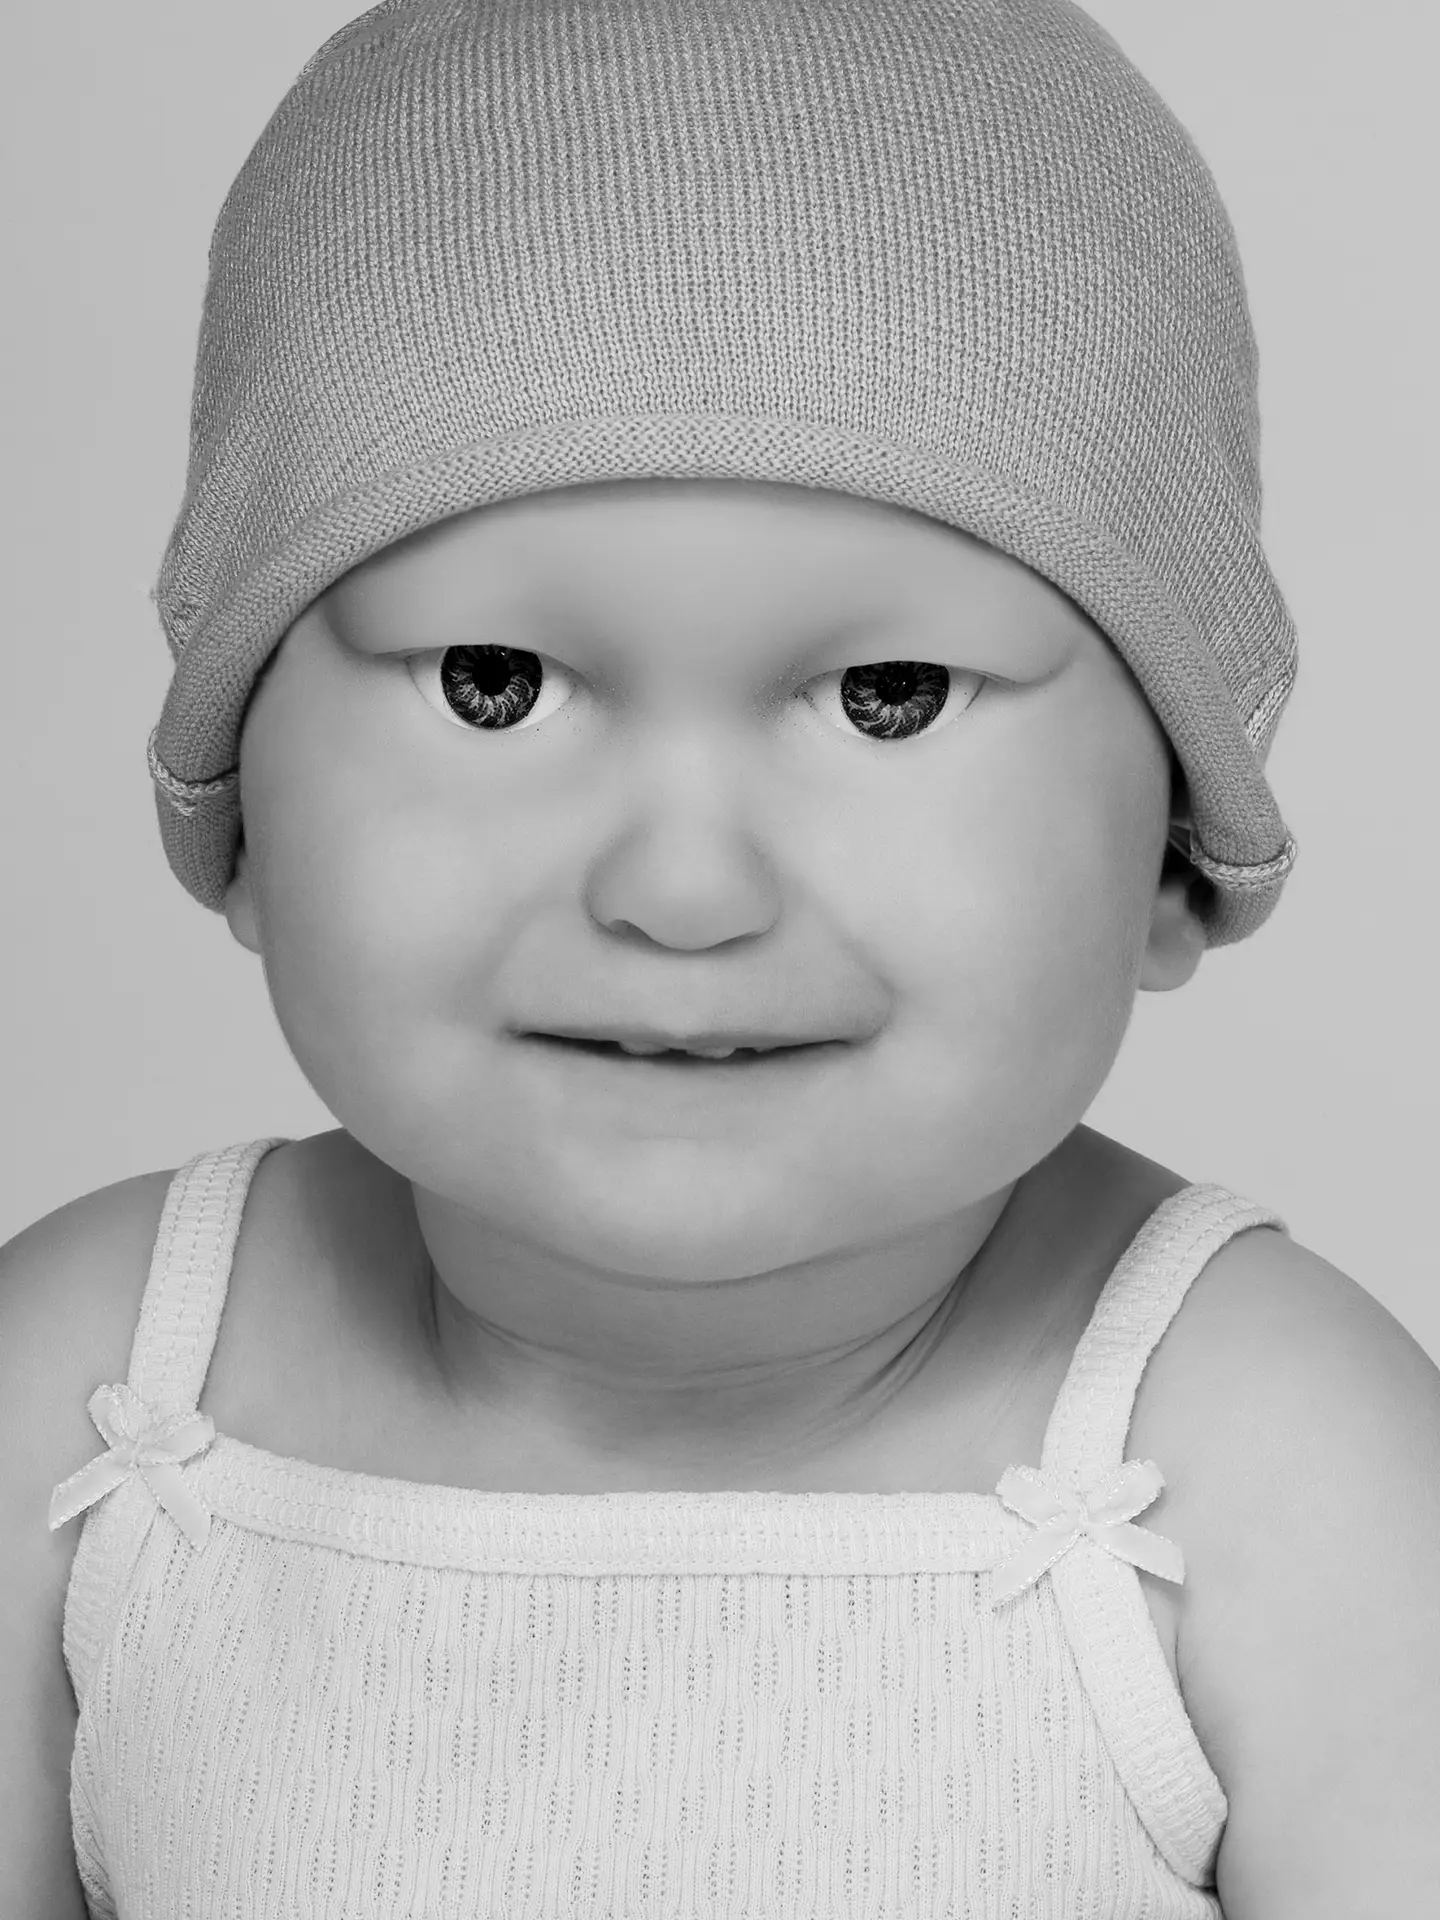 Black and white portrait of a hybrid baby from the project BetaBabies-CryptoKids-Techno Teens by artist Julianne Rose